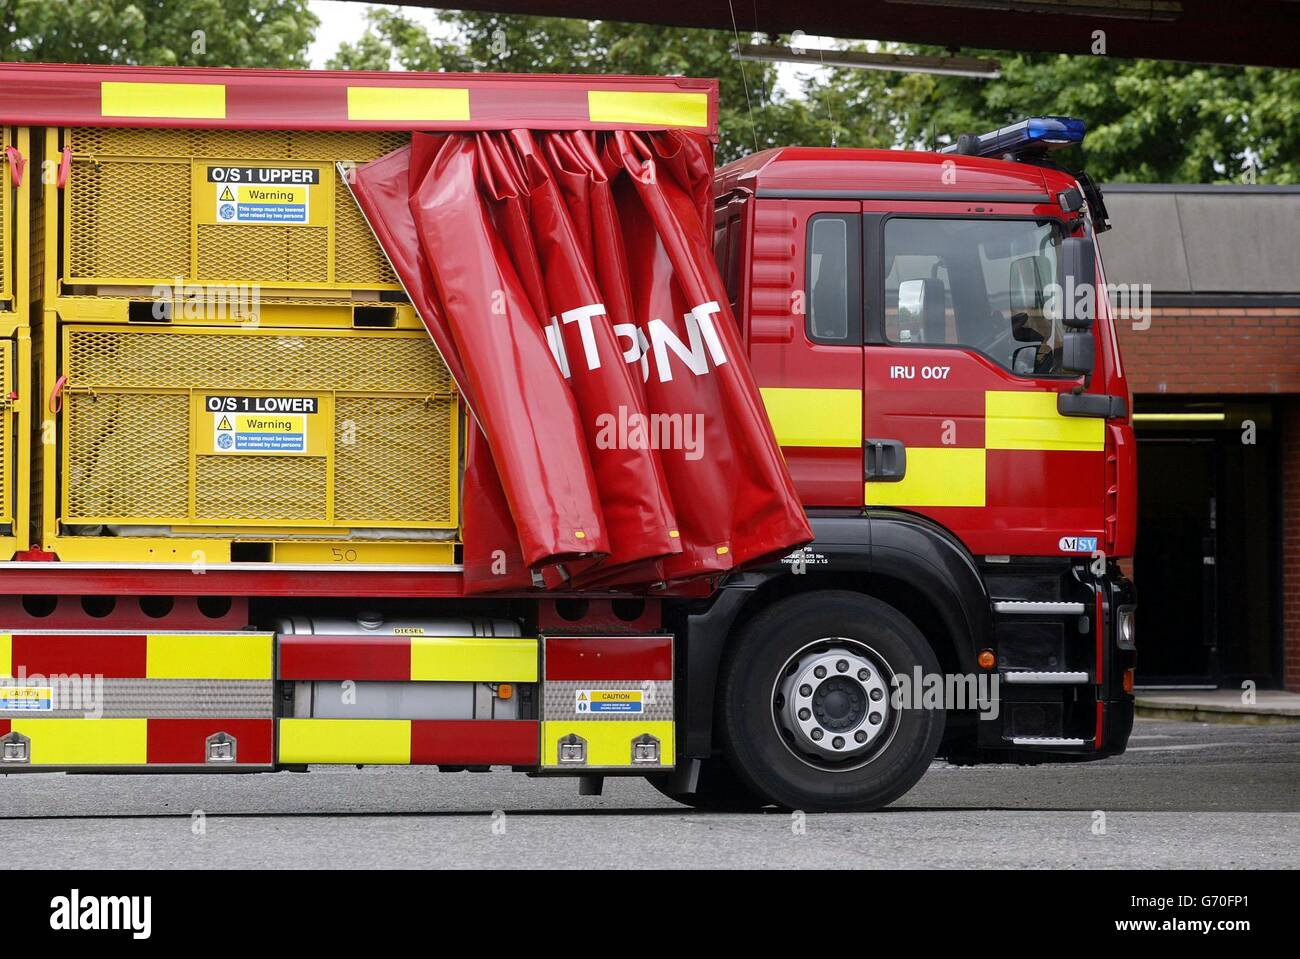 An Incident Response Unit in the appliance yard at Farnworth Fire Station, Greater Manchester. It is similar to the kind of vehicle that has caused the threat of strikes in Greater Manchester, where managers have been accused of 'bully-boy tactics' by the Fire Brigades Union over the suspension of firemen in Salford for refusing to use new anti-terrorist equipment. The row has sparked unofficial industrial action in parts of the UK, threatening to reignite a national strike. Stock Photo